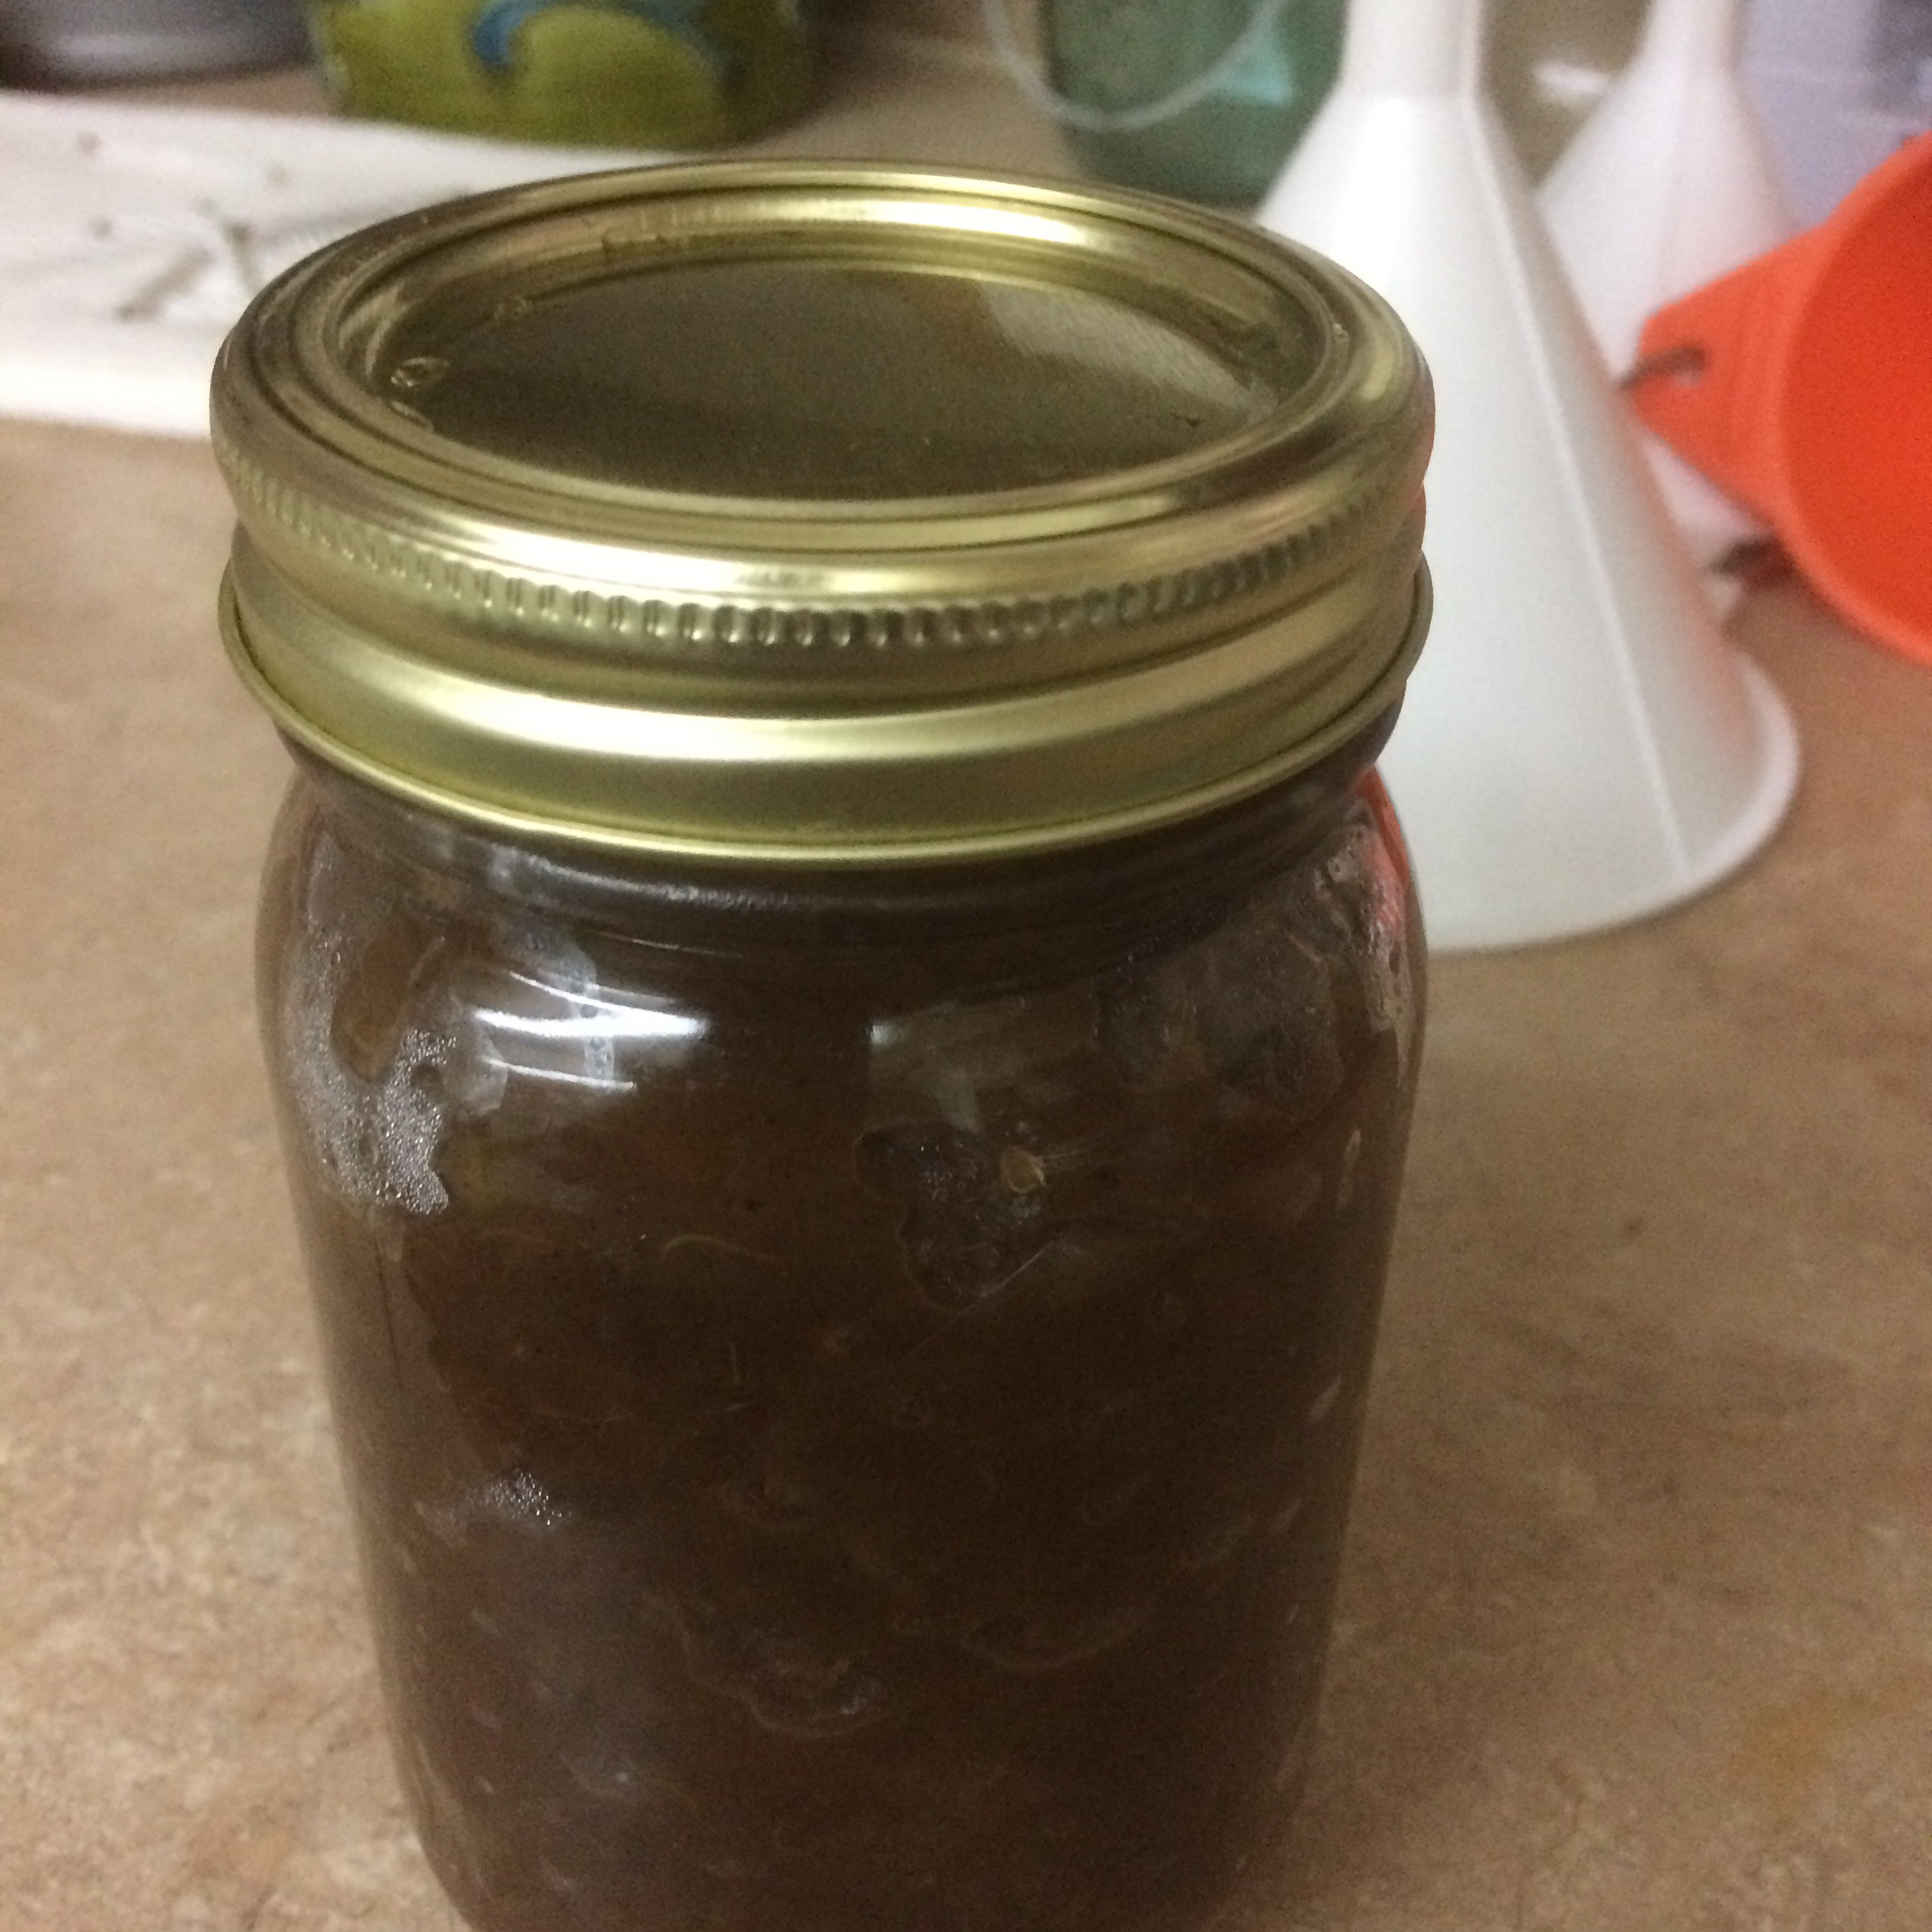 Lower Sugar Spicy All-Day Apple Butter